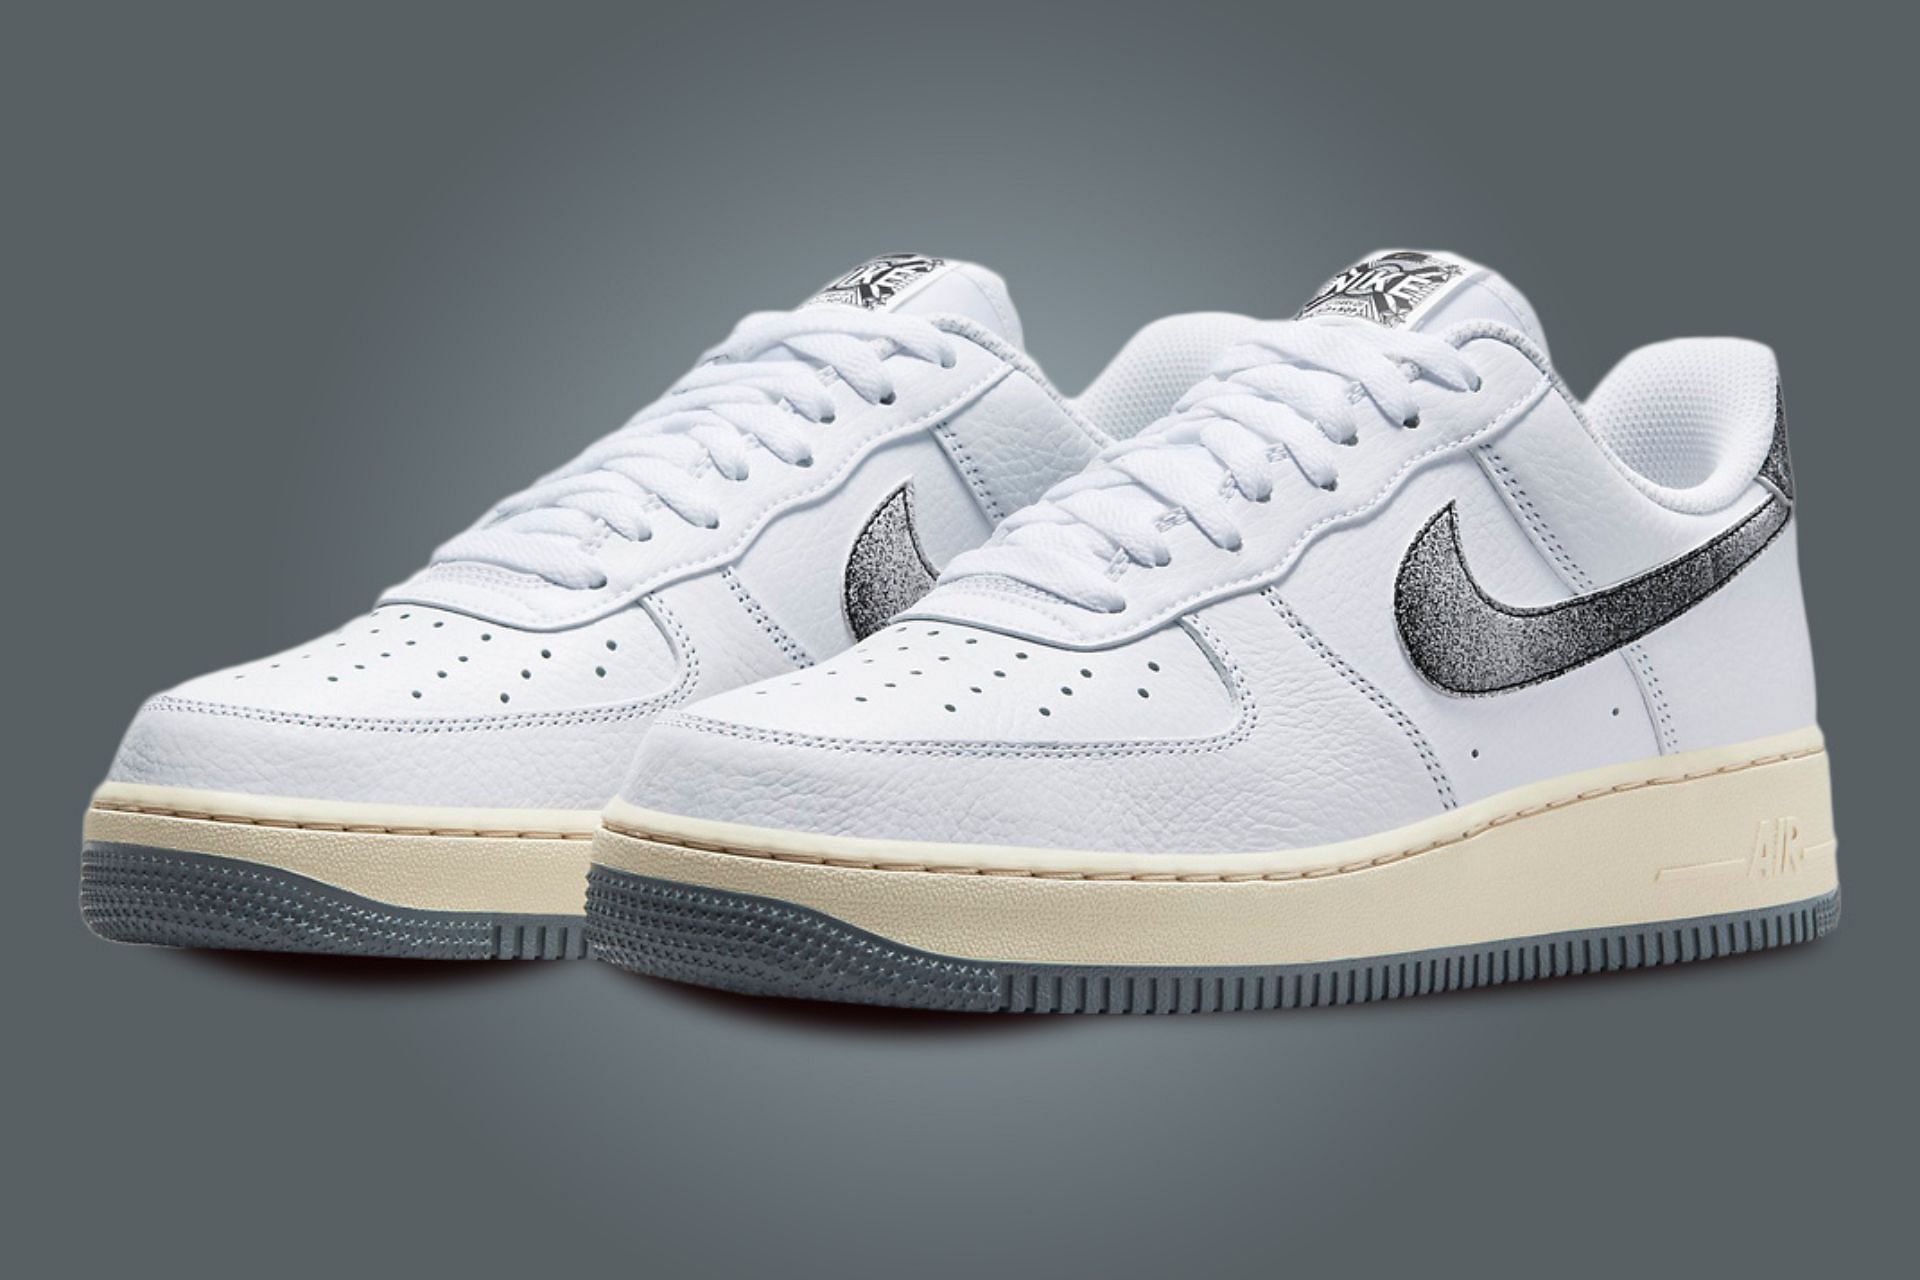 Classics: Nike Air Force 1 Low “Classics” shoe: Price and more details ...